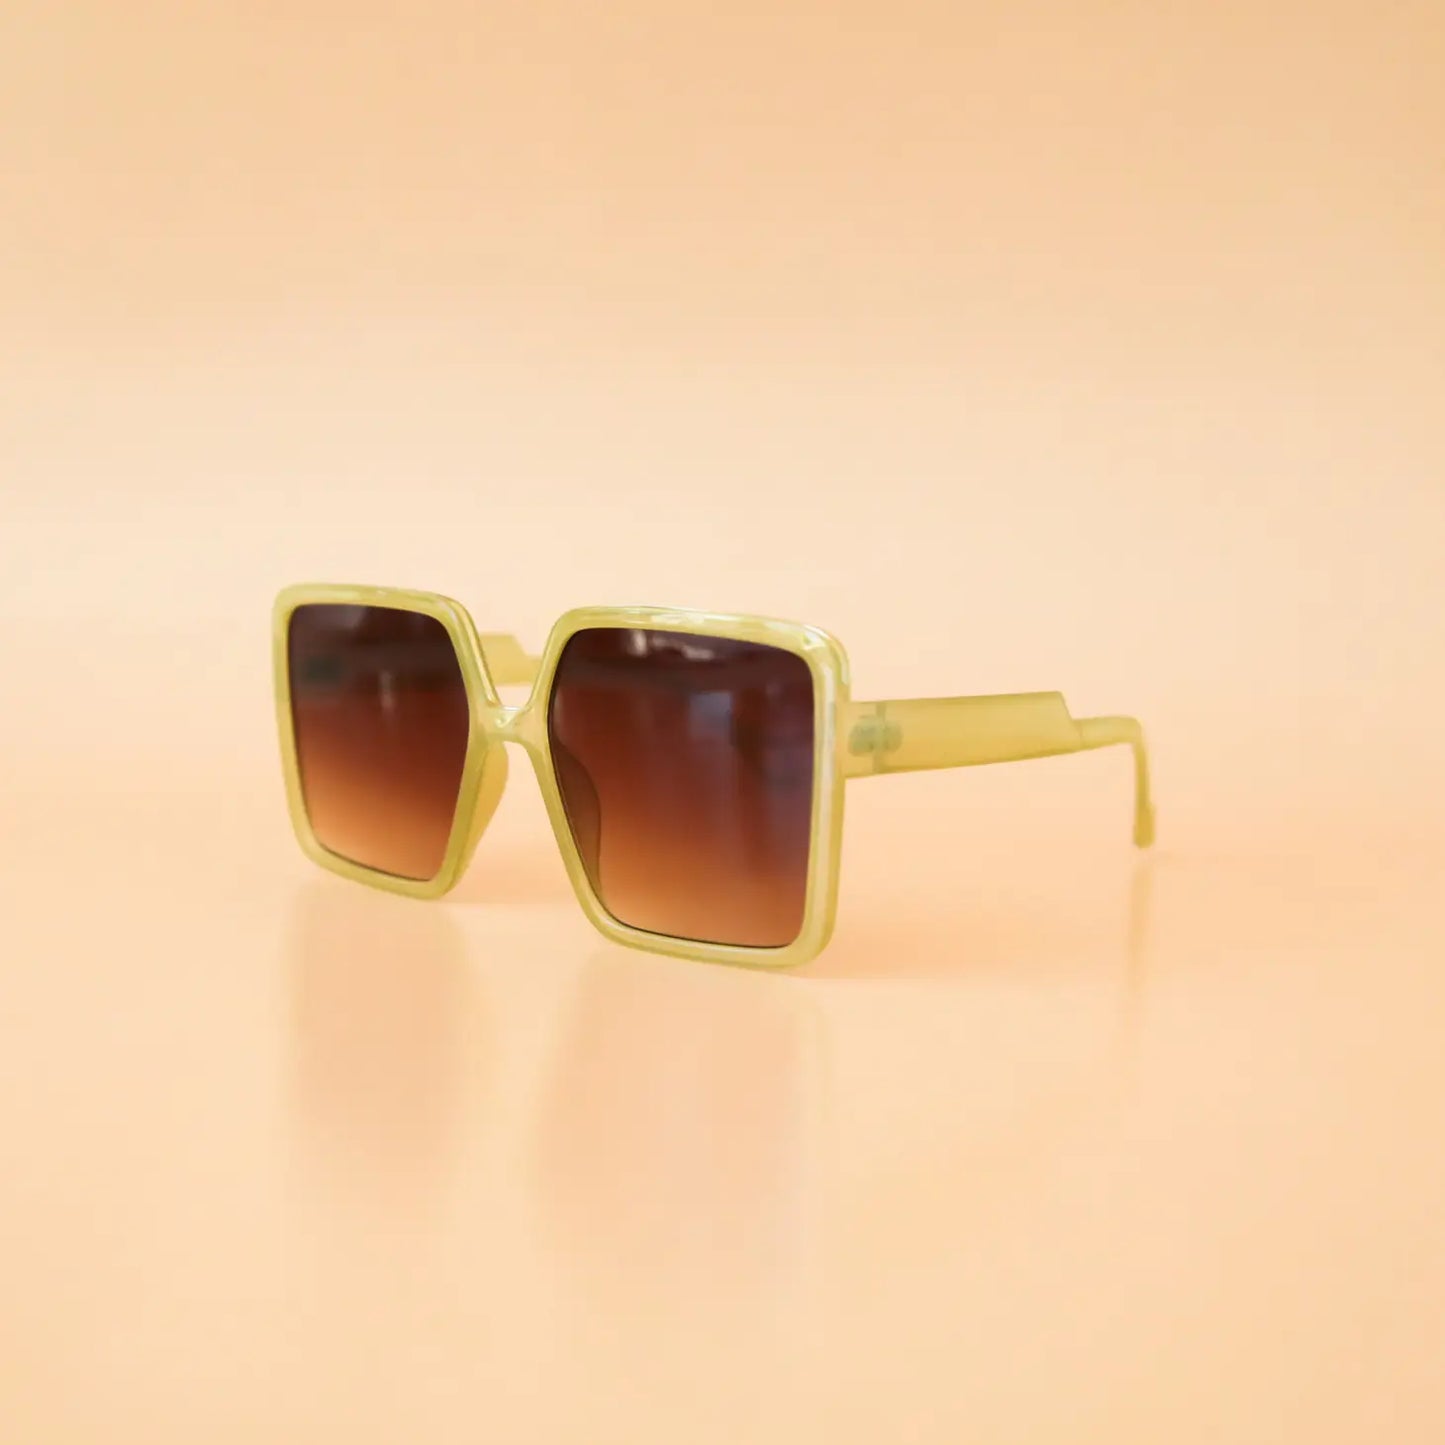 kelso sunglasses in olive